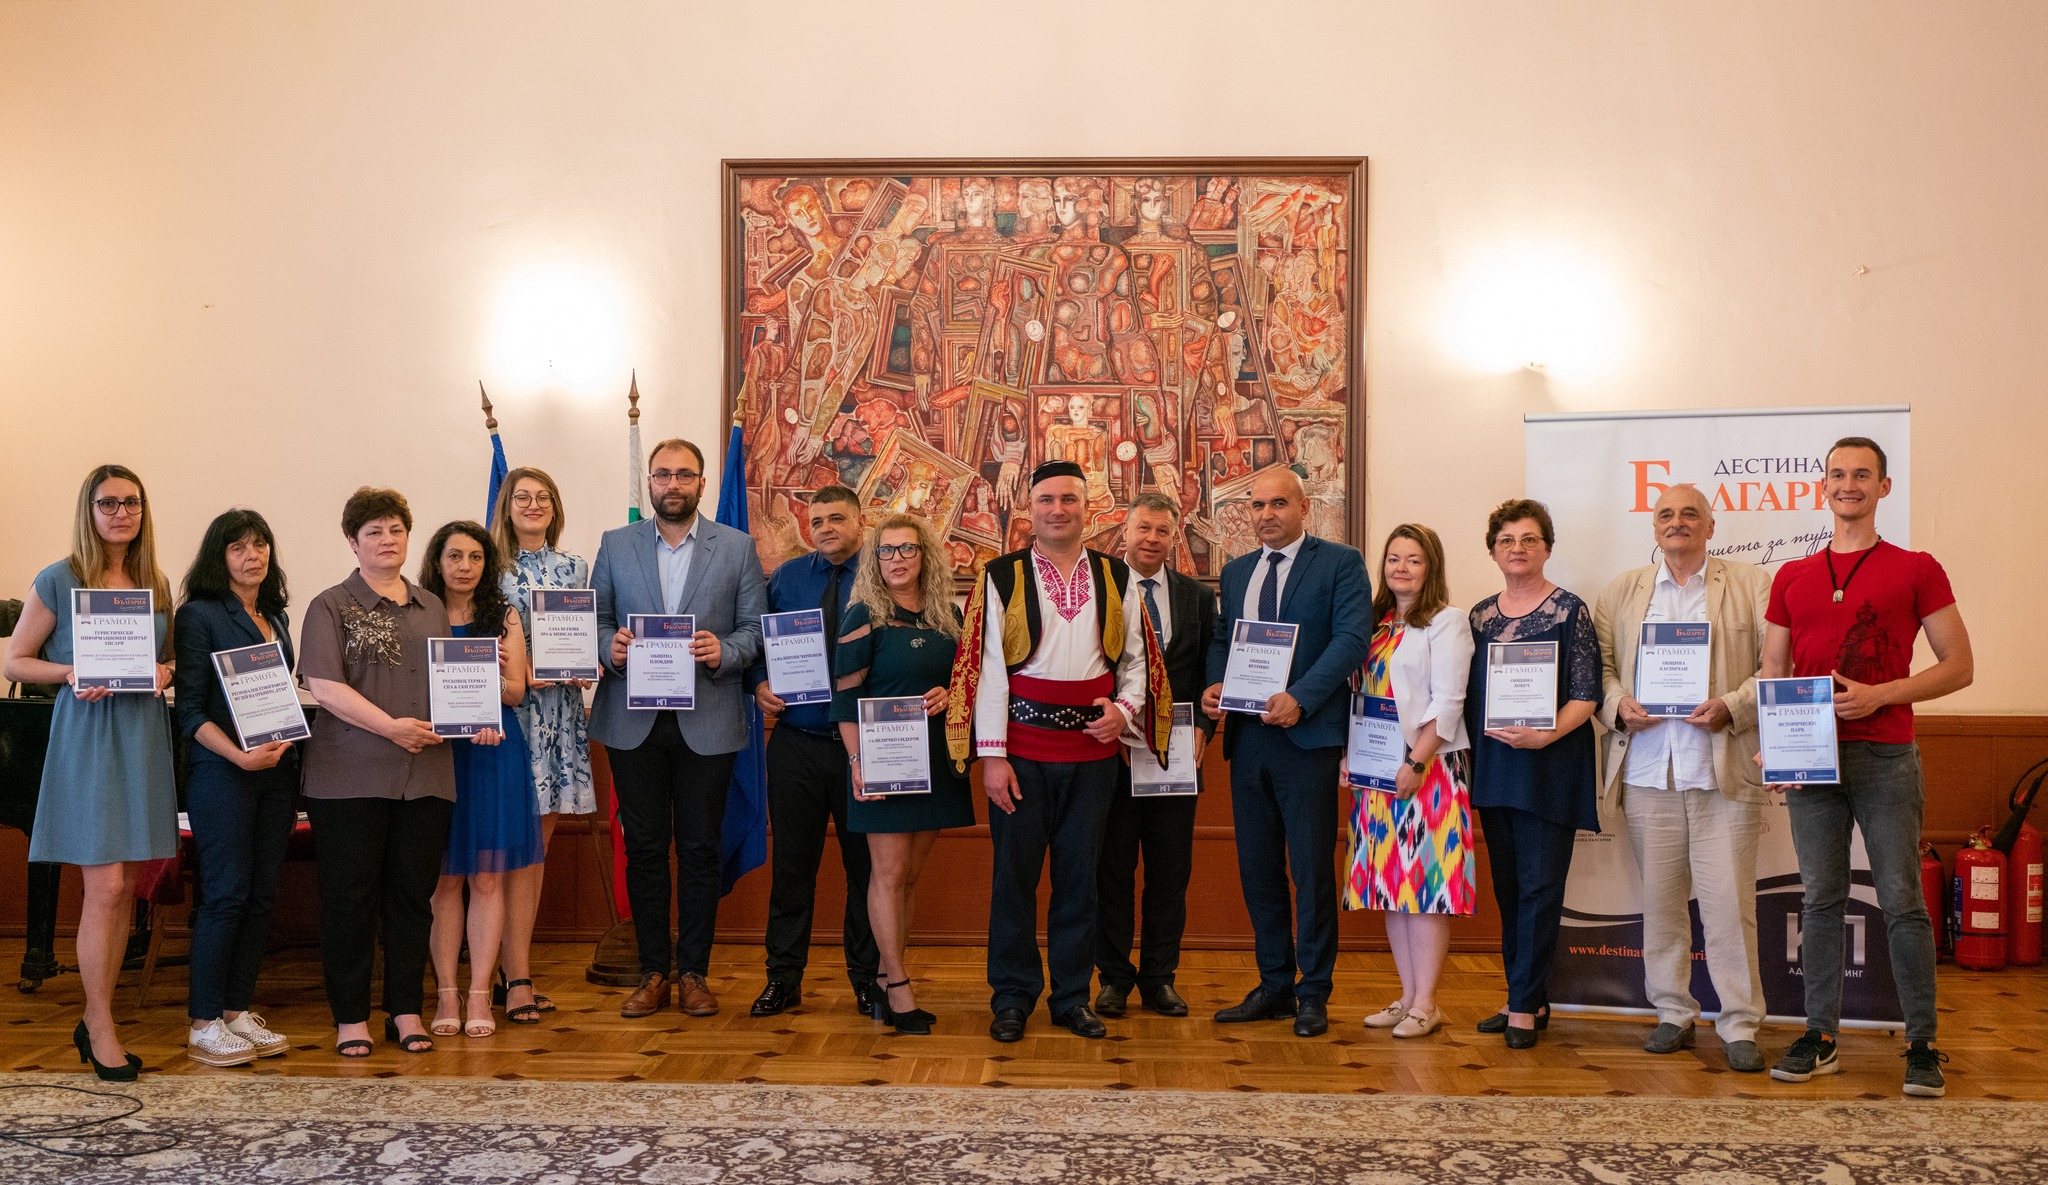 Plovdiv with the prize of "Fastest growing destination for cultural tourism"